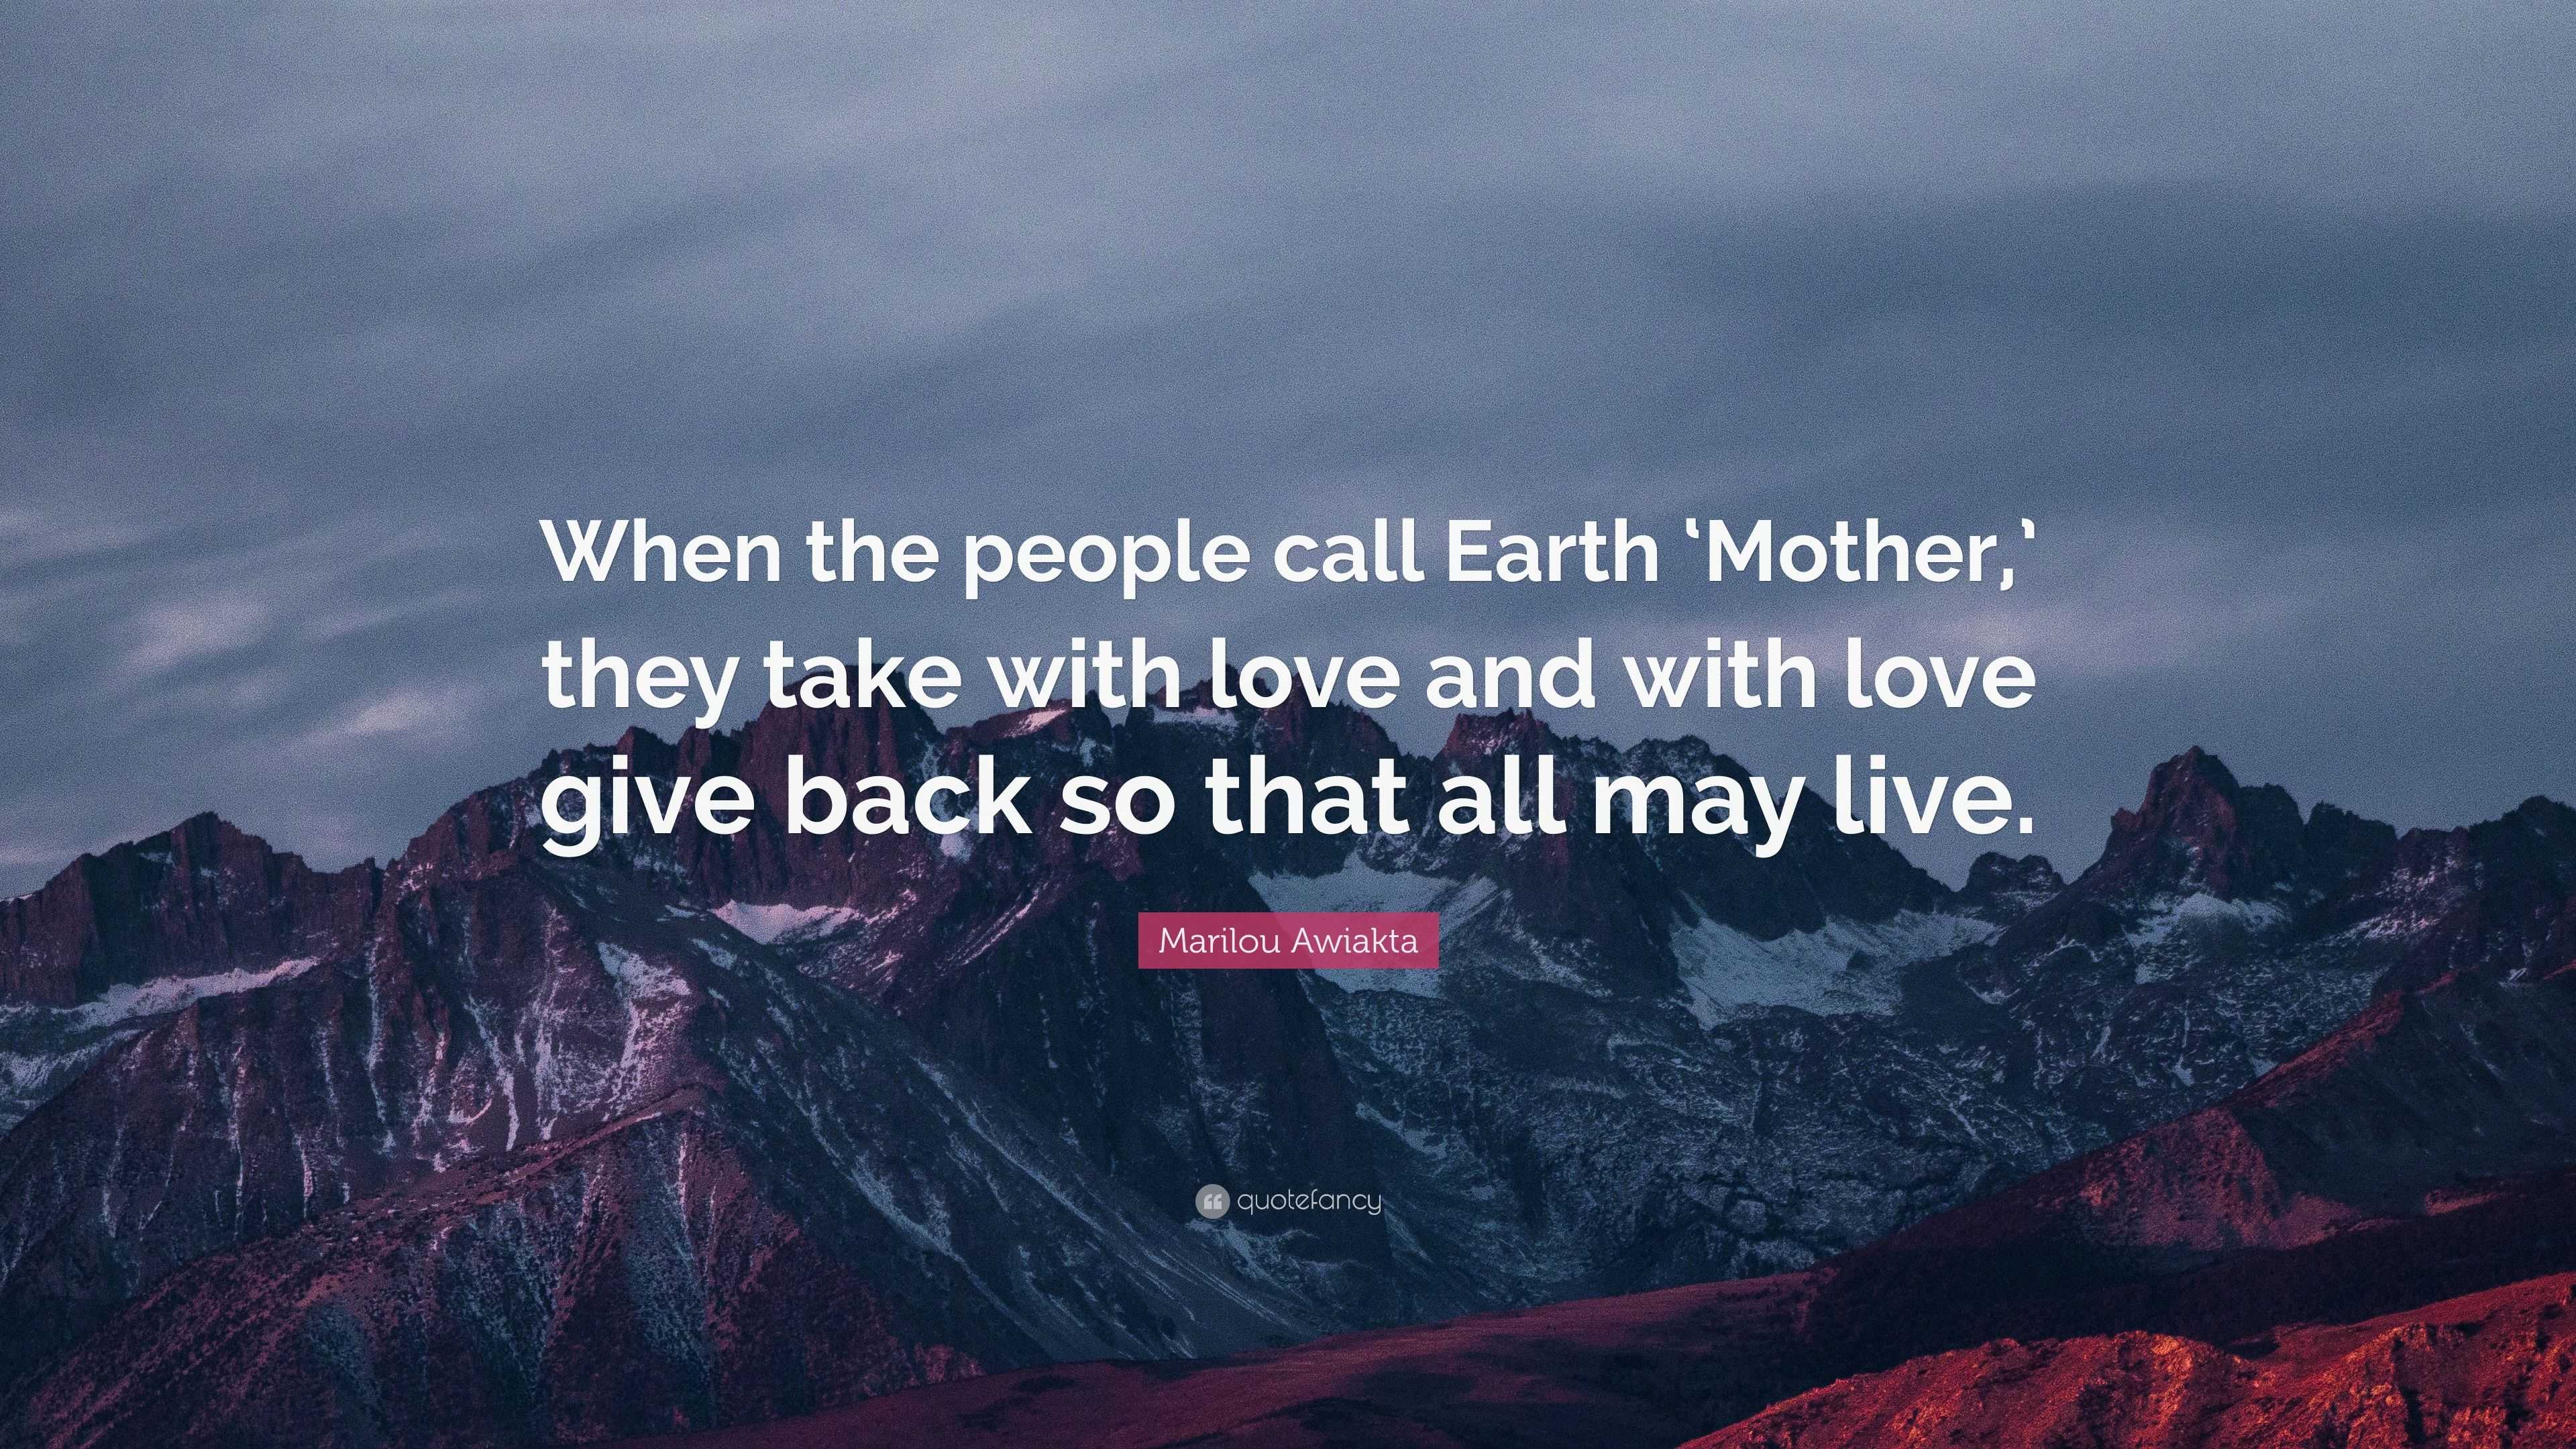 Marilou Awiakta Quote “When the people call Earth Mother they take